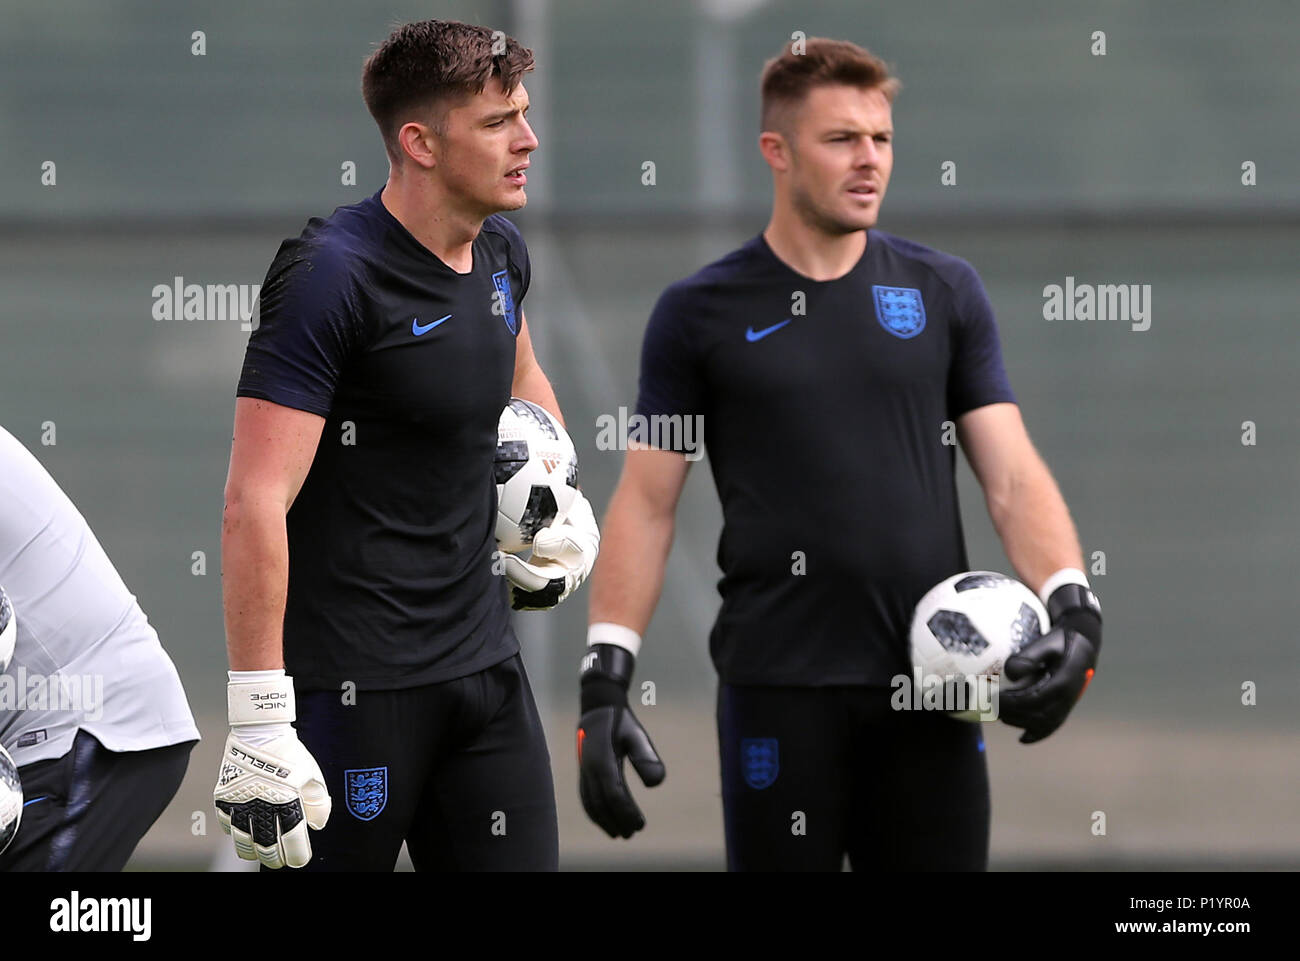 England goalkeepers Nick Pope (left) and Jack Butland during the training session at the Spartak Zelenogorsk Stadium, Repino. Stock Photo